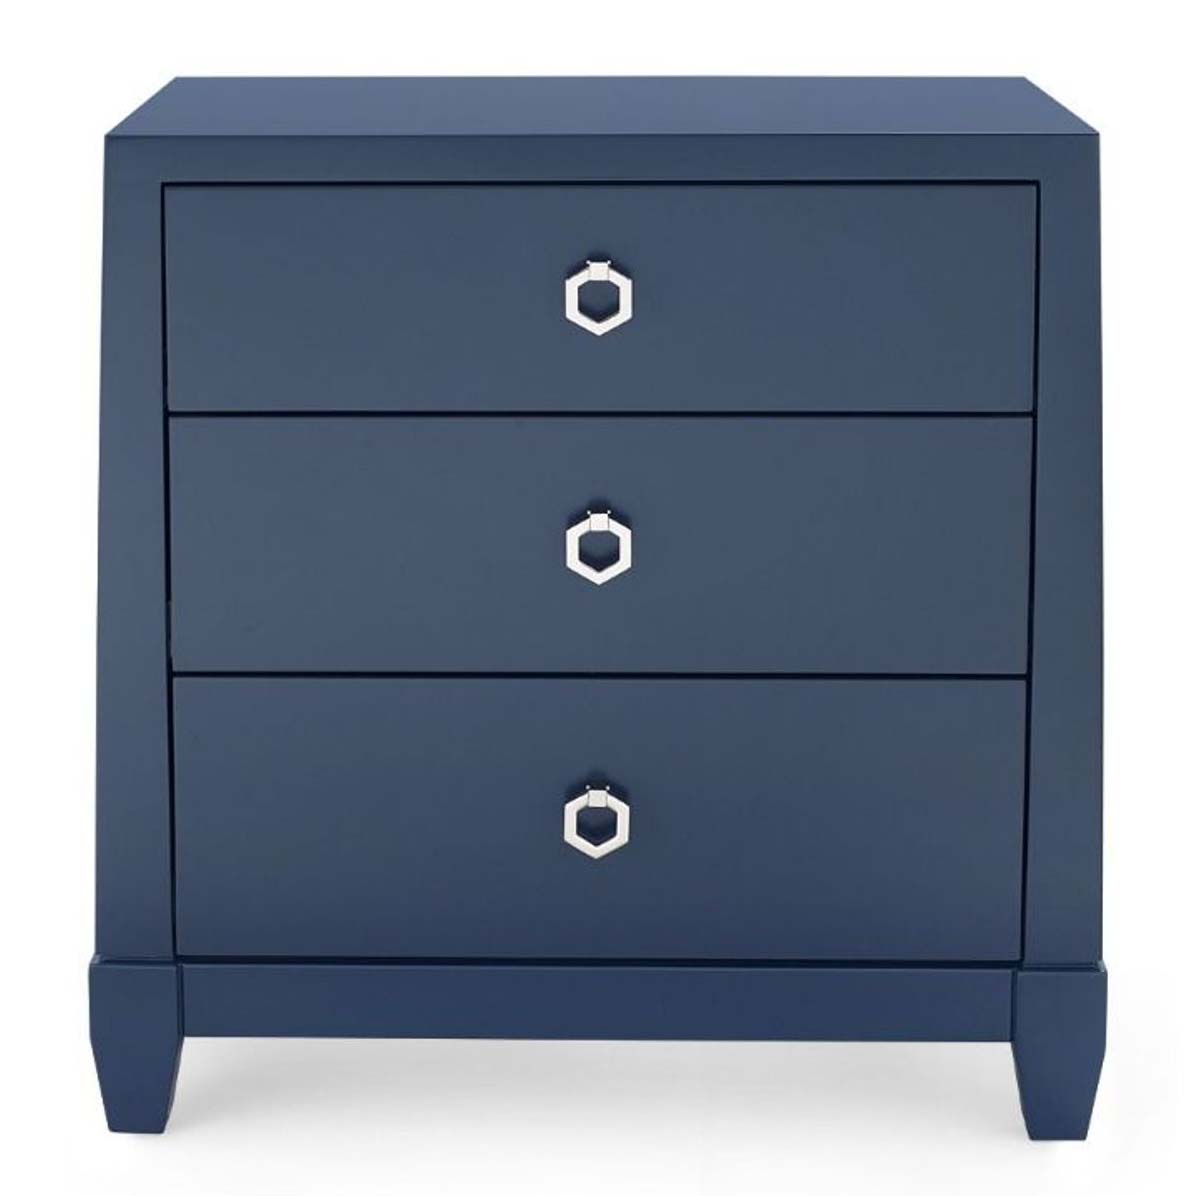 MADISON COLLECTION Dressers